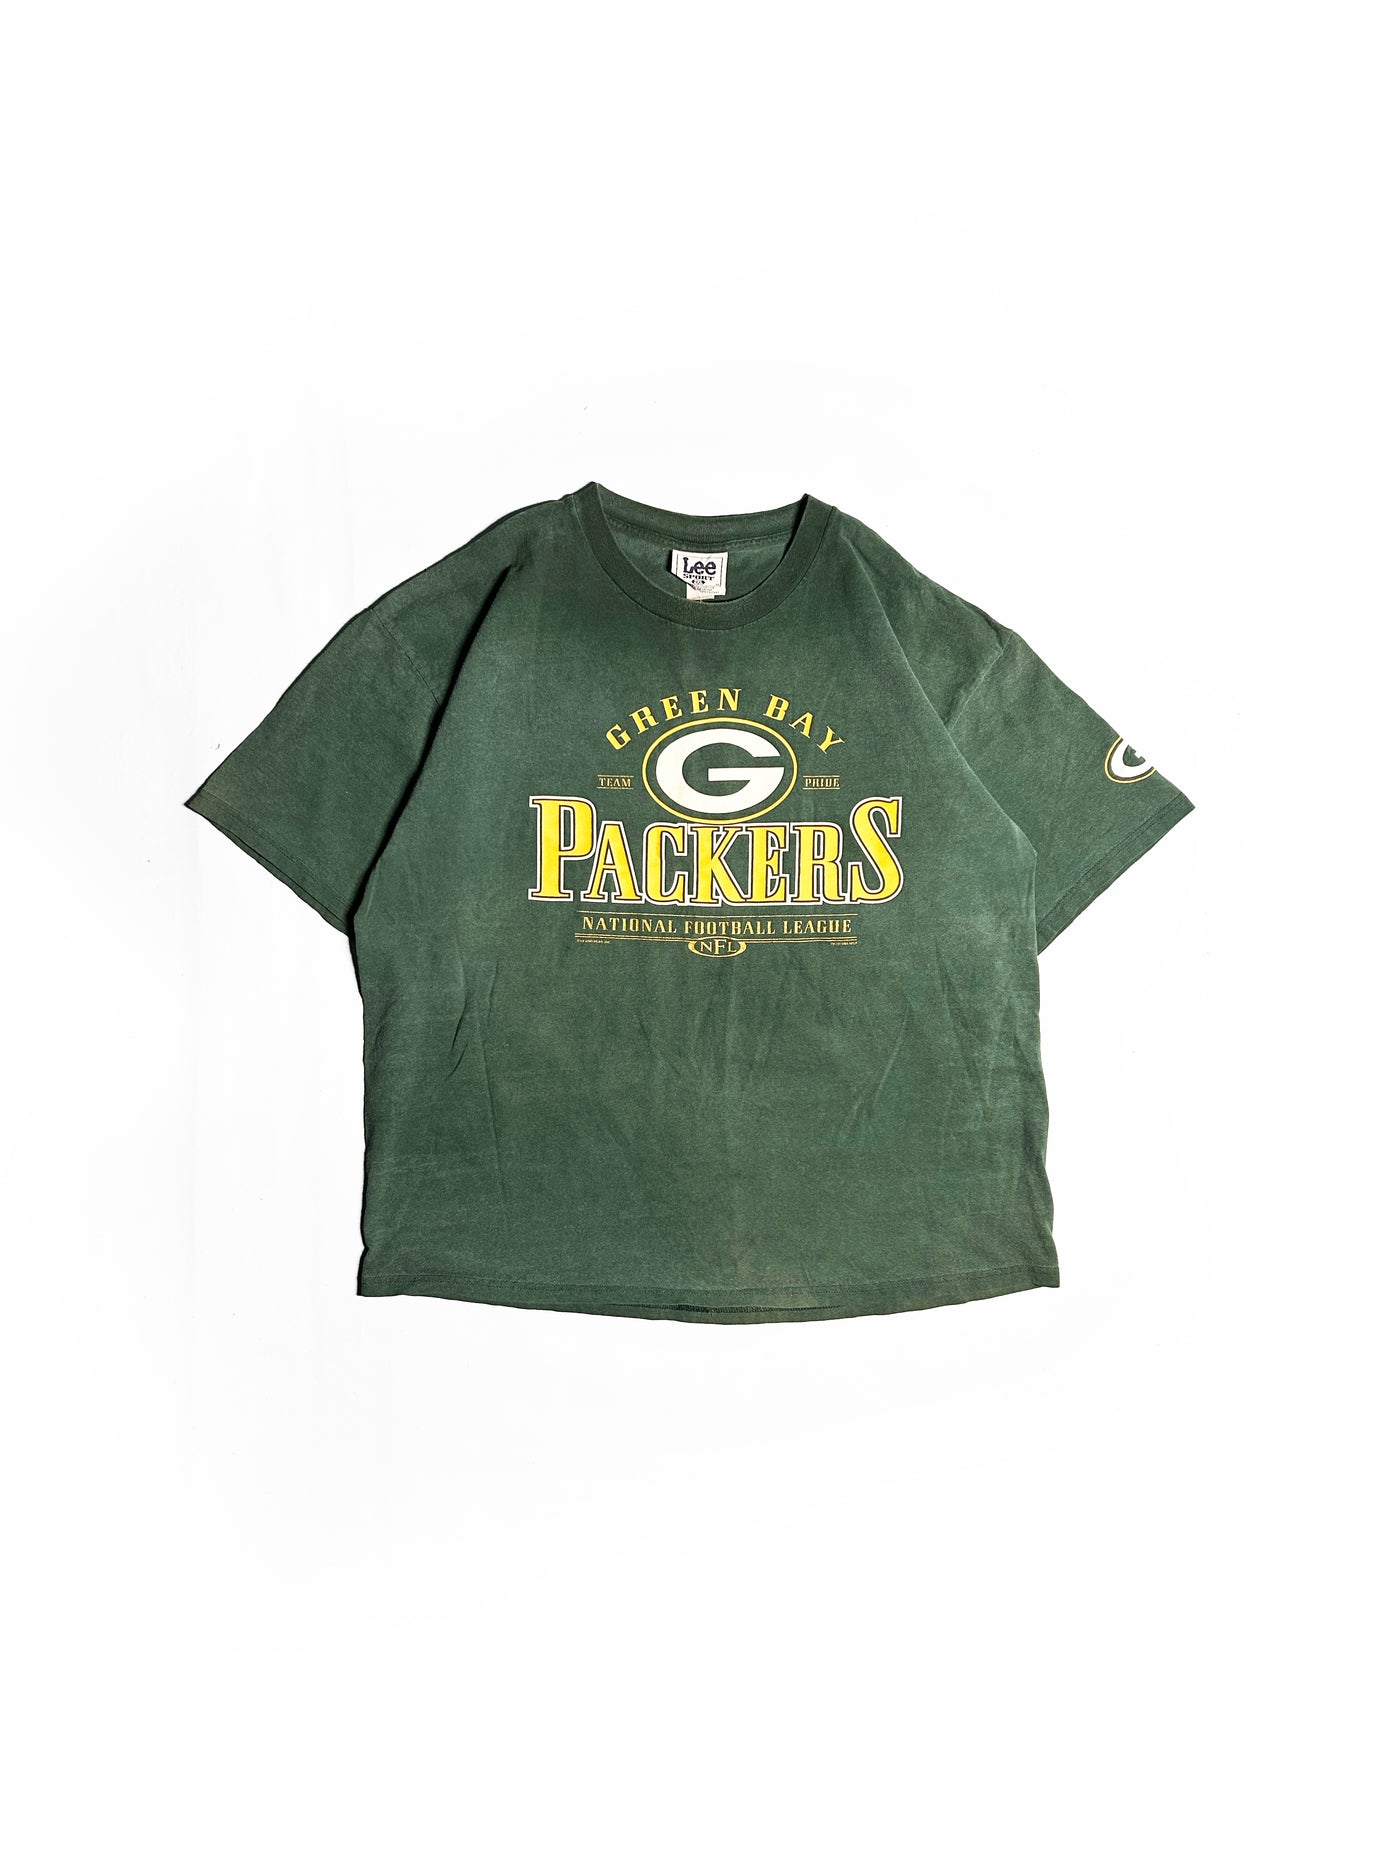 Vintage 1999 Green Bay Packers T-Shirt